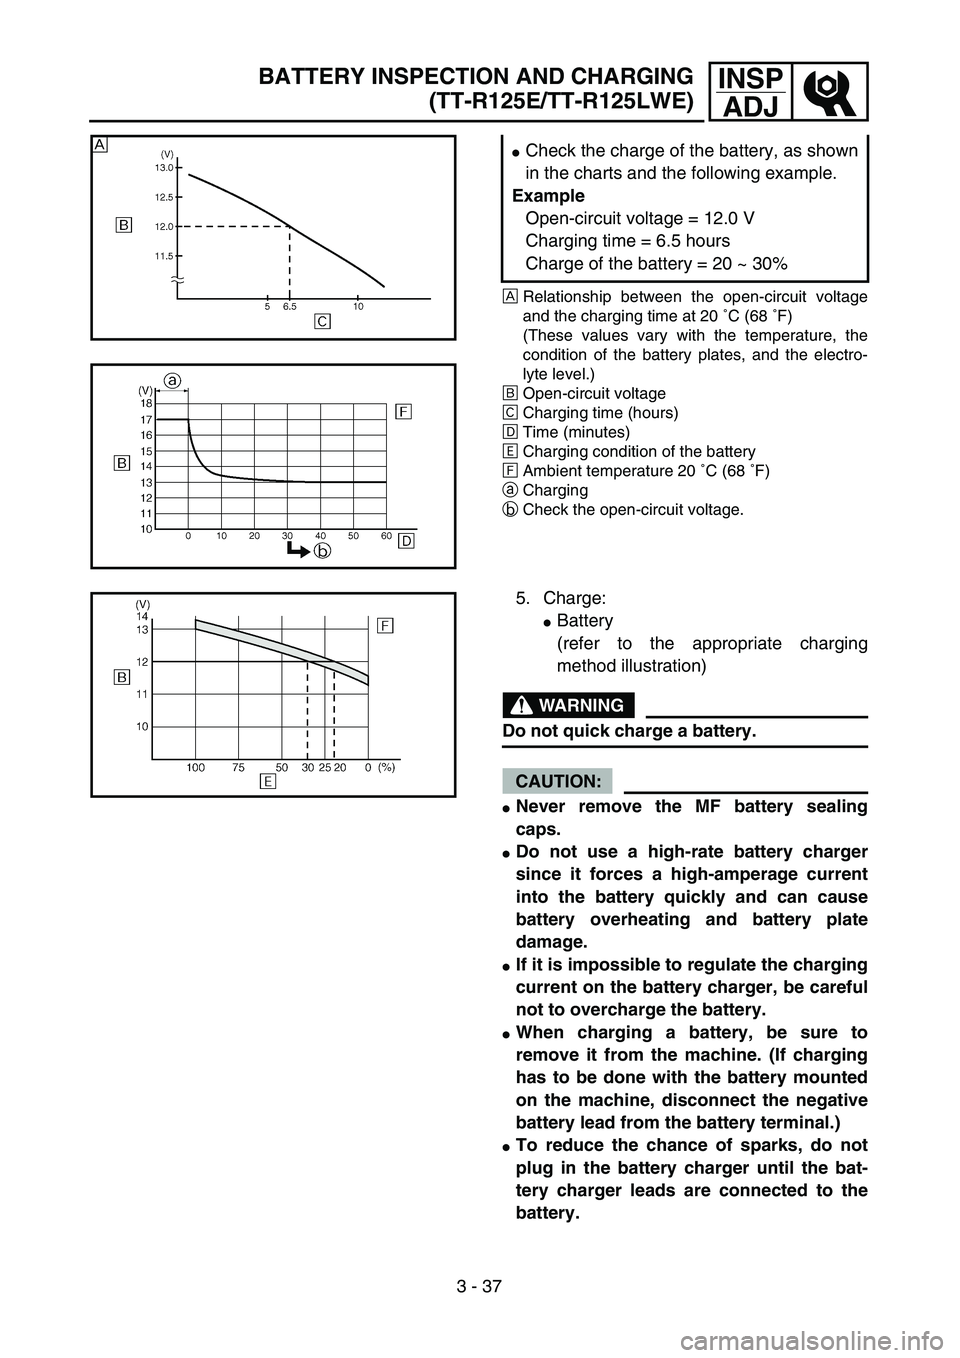 YAMAHA TTR125 2005  Owners Manual 3 - 37
INSP
ADJ
ÅRelationship between the open-circuit voltage
and the charging time at 20 ˚C (68 ˚F) 
(These values vary with the temperature, the
condition of the battery plates, and the electro-